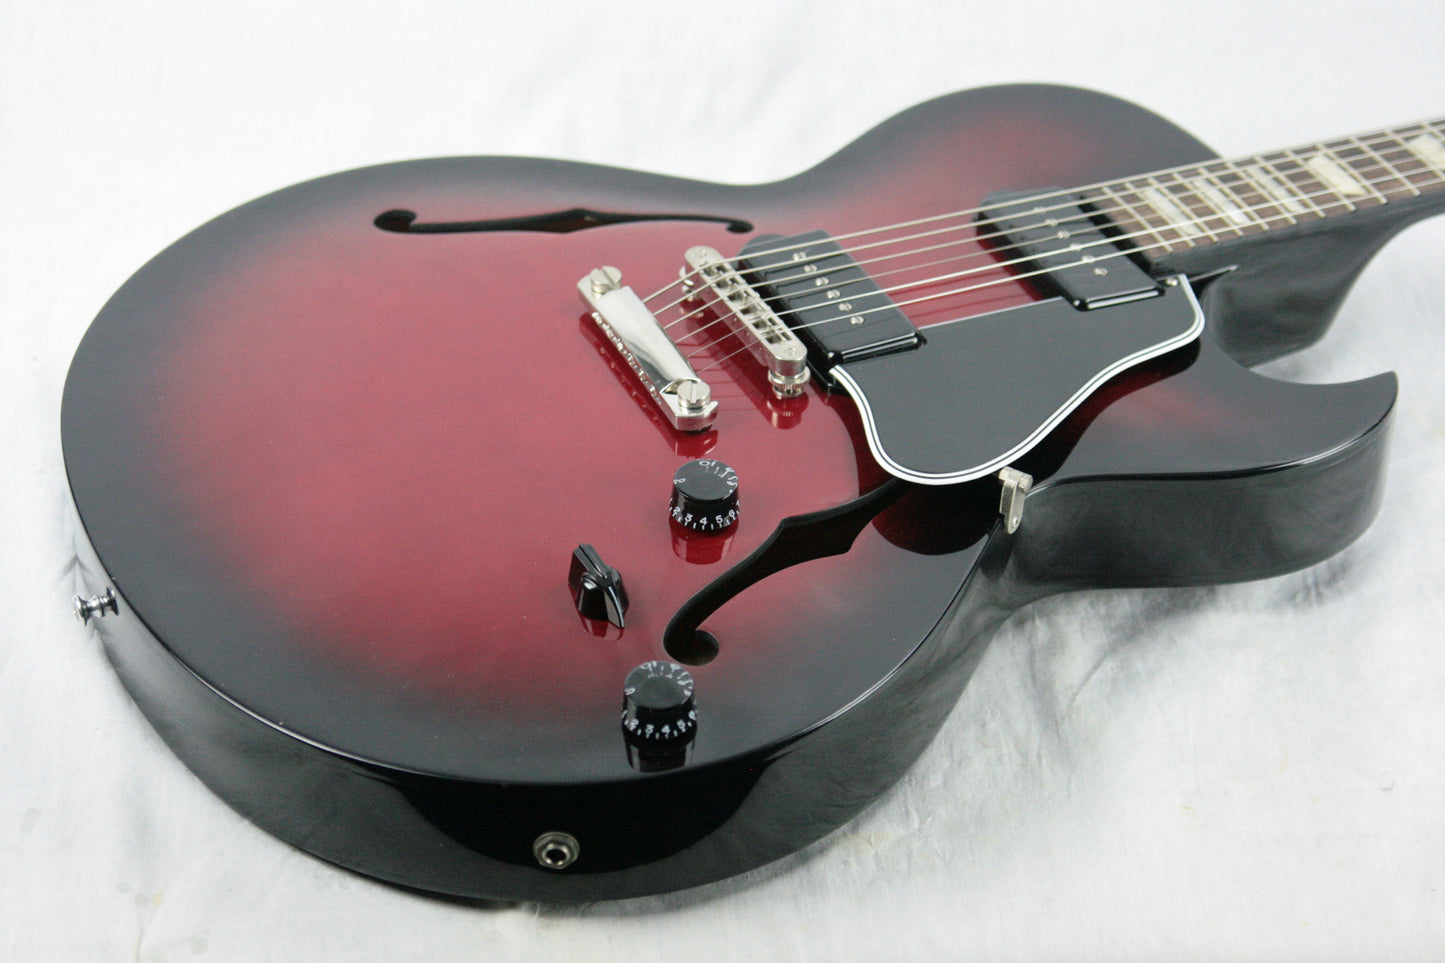 SIGNED 2014 Gibson ES-137 Billie Joe Armstrong Black Cherry! Limited Edition AUTOGRAPHED